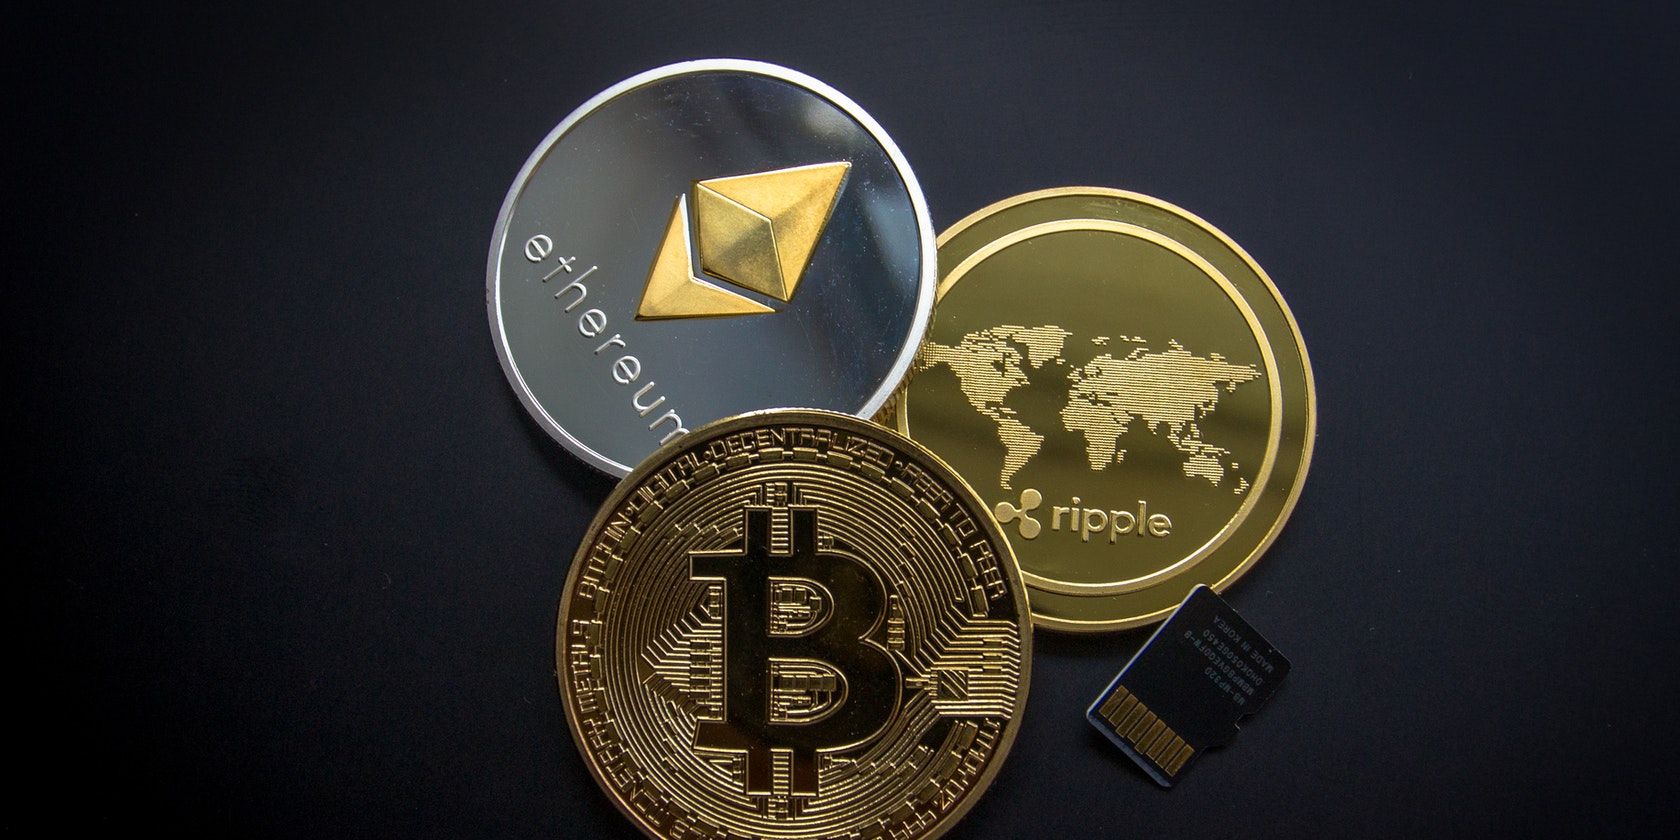 Stock image photo of Bitcoin, Ethereum and Ripple